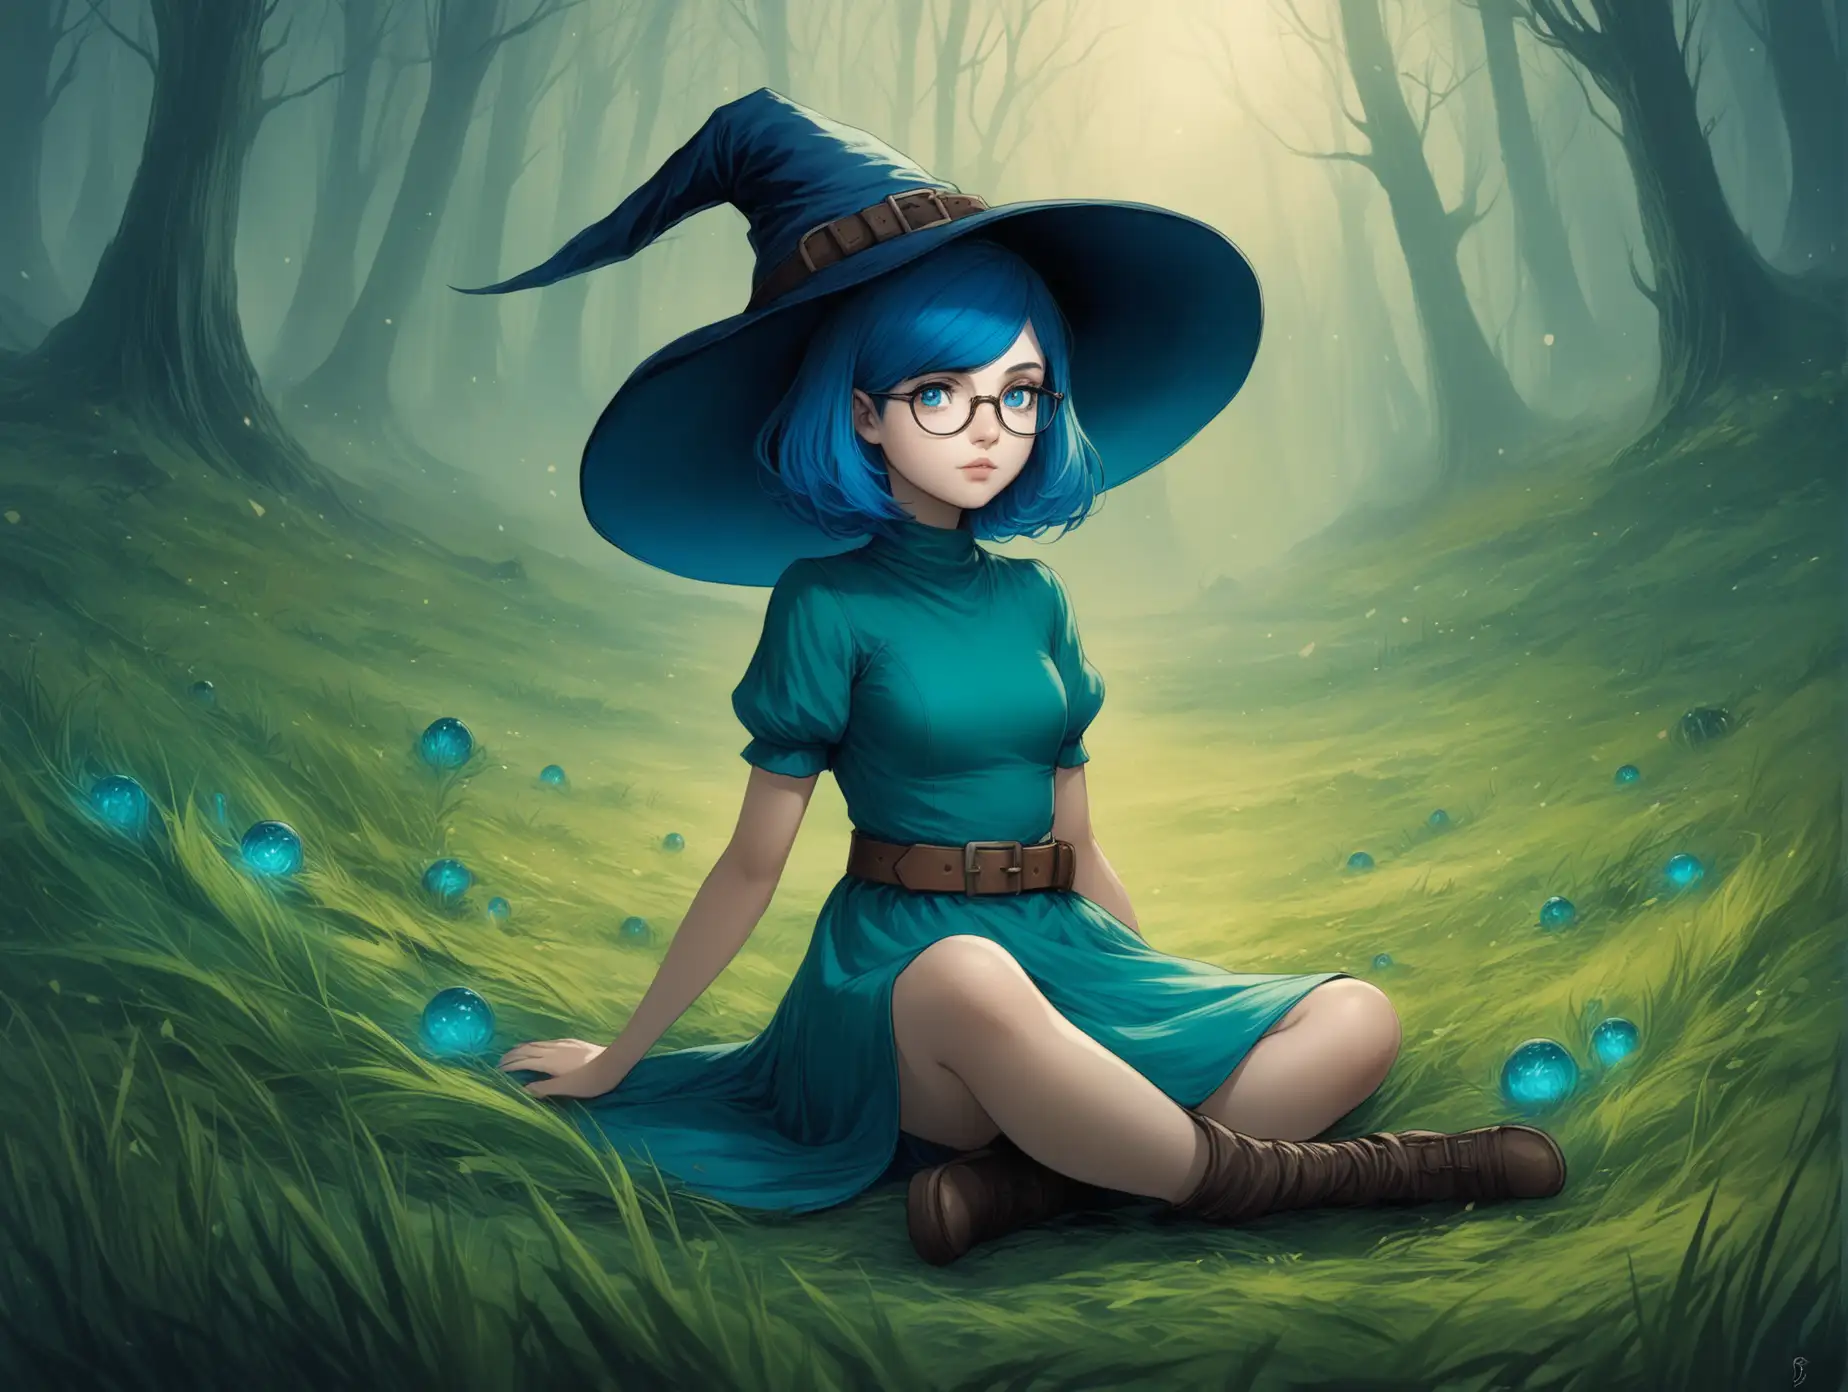 Herbalist-Witch-with-Bright-Blue-Hair-in-Dark-Fantasy-Setting